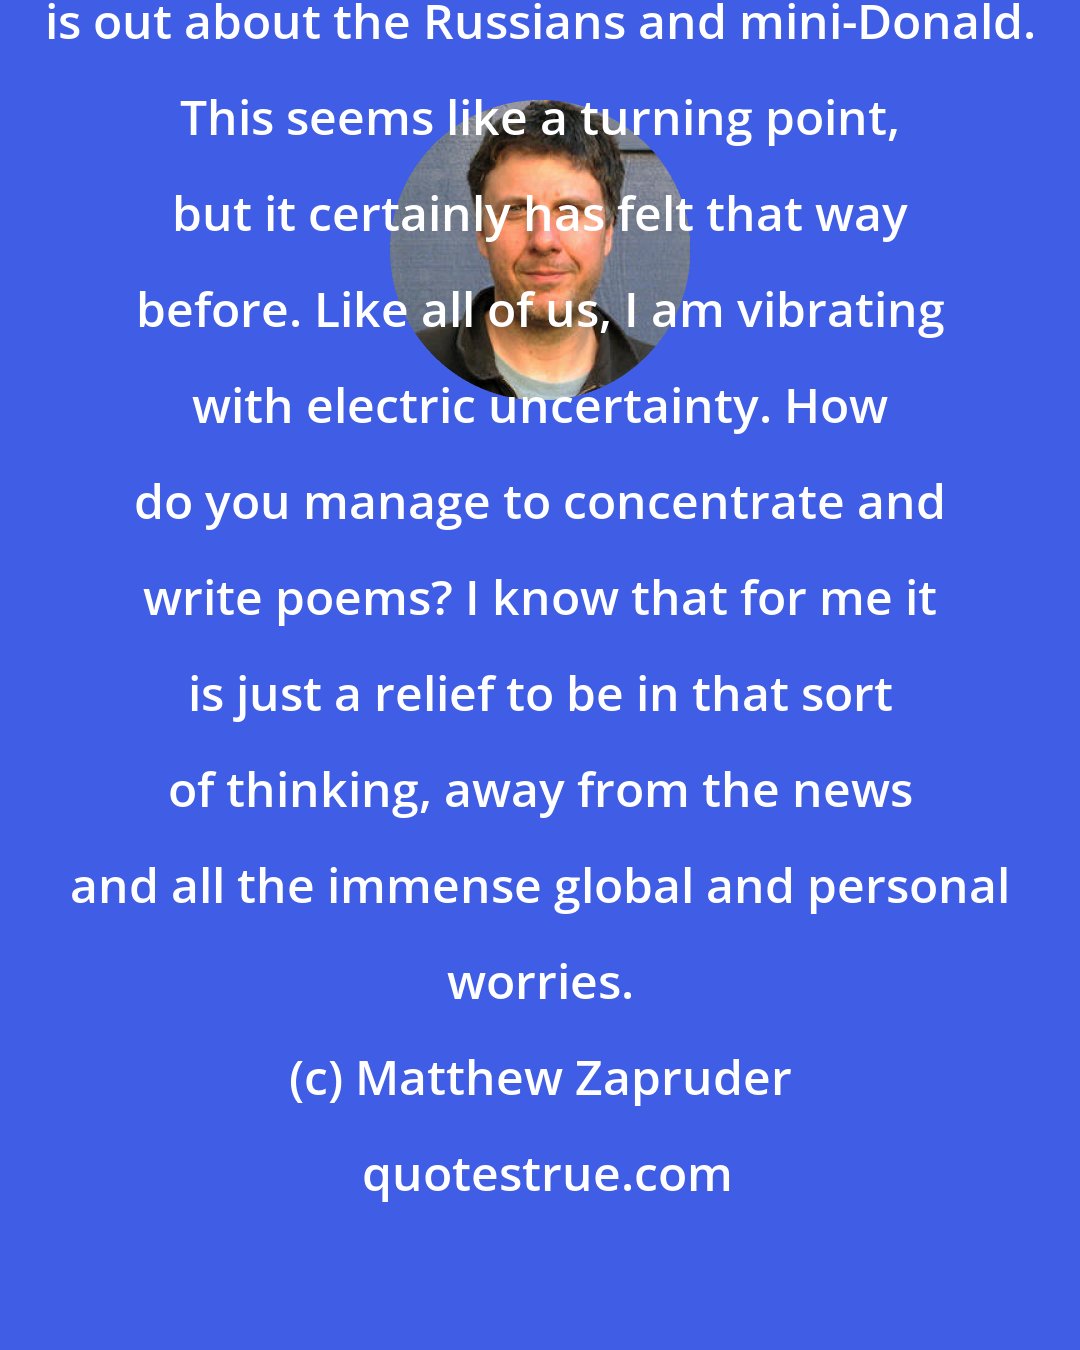 Matthew Zapruder: Today is such a strange day. The news is out about the Russians and mini-Donald. This seems like a turning point, but it certainly has felt that way before. Like all of us, I am vibrating with electric uncertainty. How do you manage to concentrate and write poems? I know that for me it is just a relief to be in that sort of thinking, away from the news and all the immense global and personal worries.